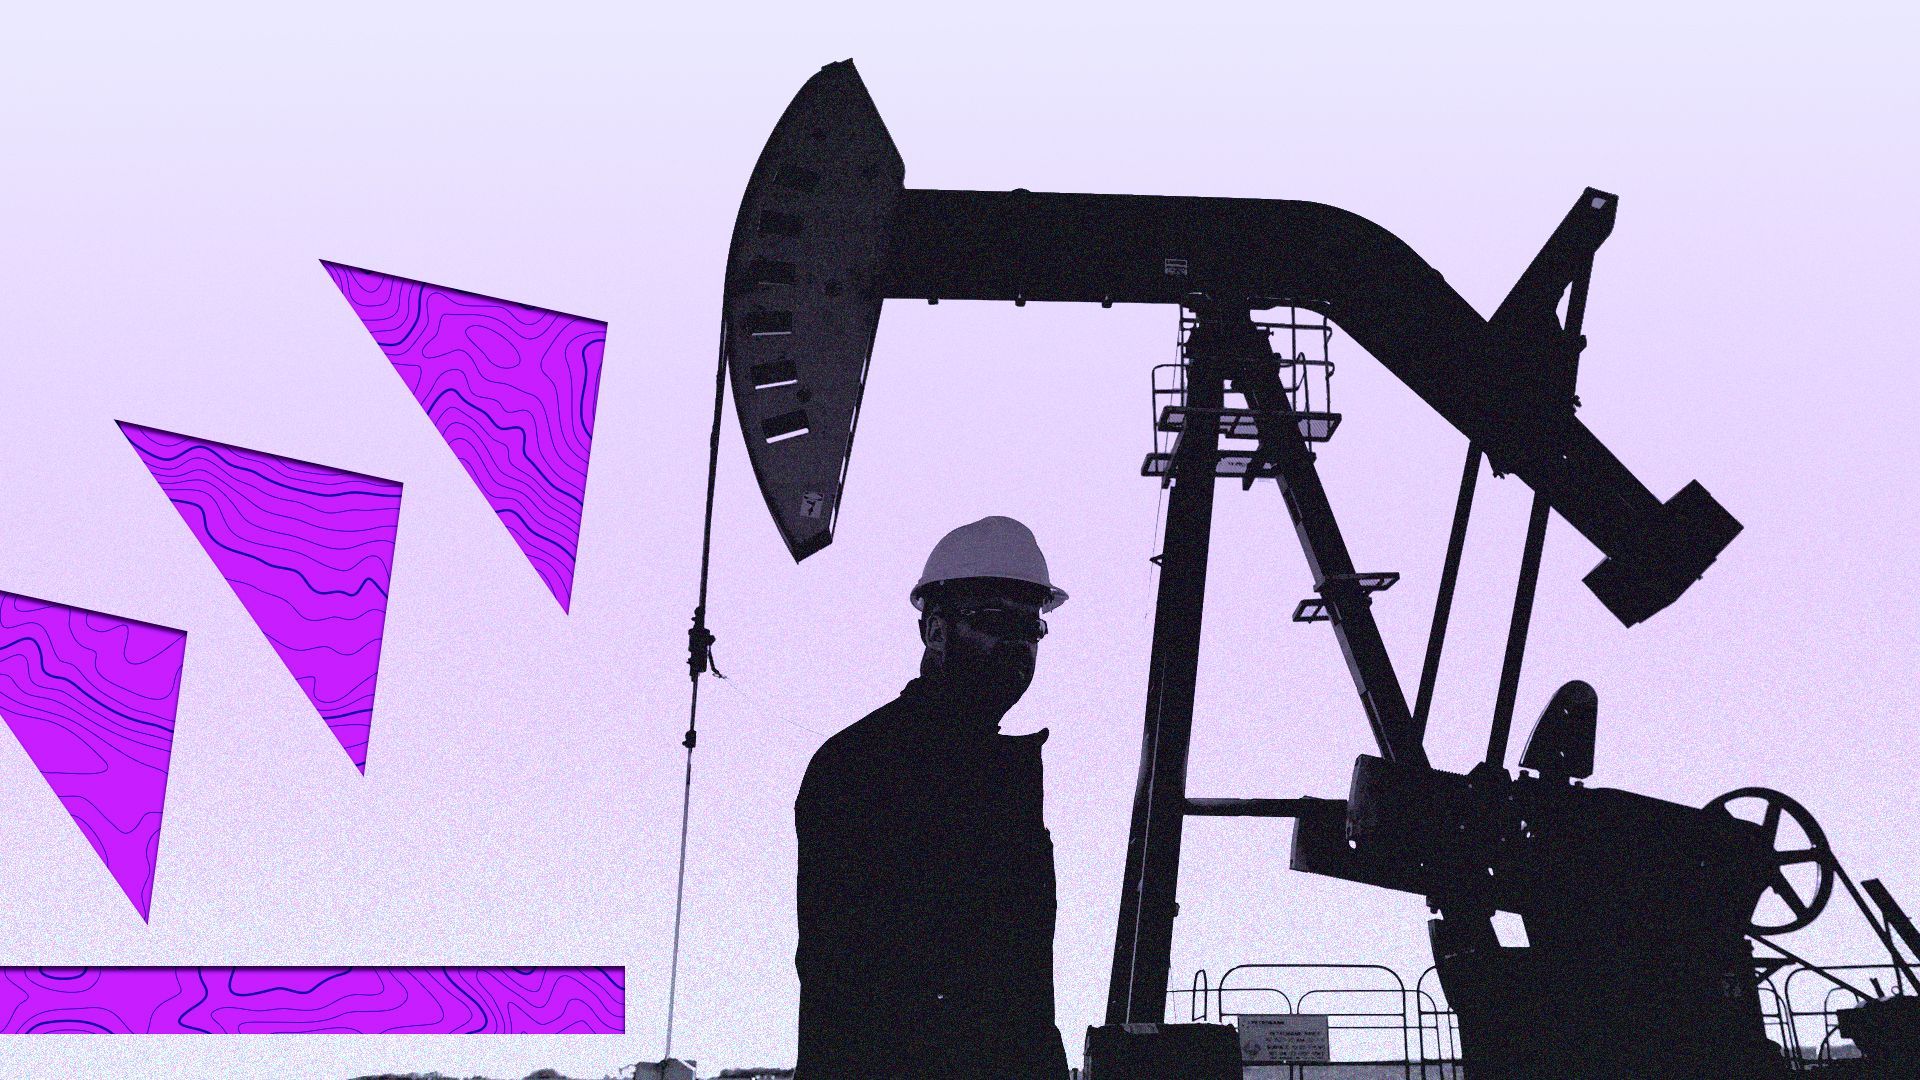 Illustration collage of a worker in front of an oil rig pump, next to graphic shapes